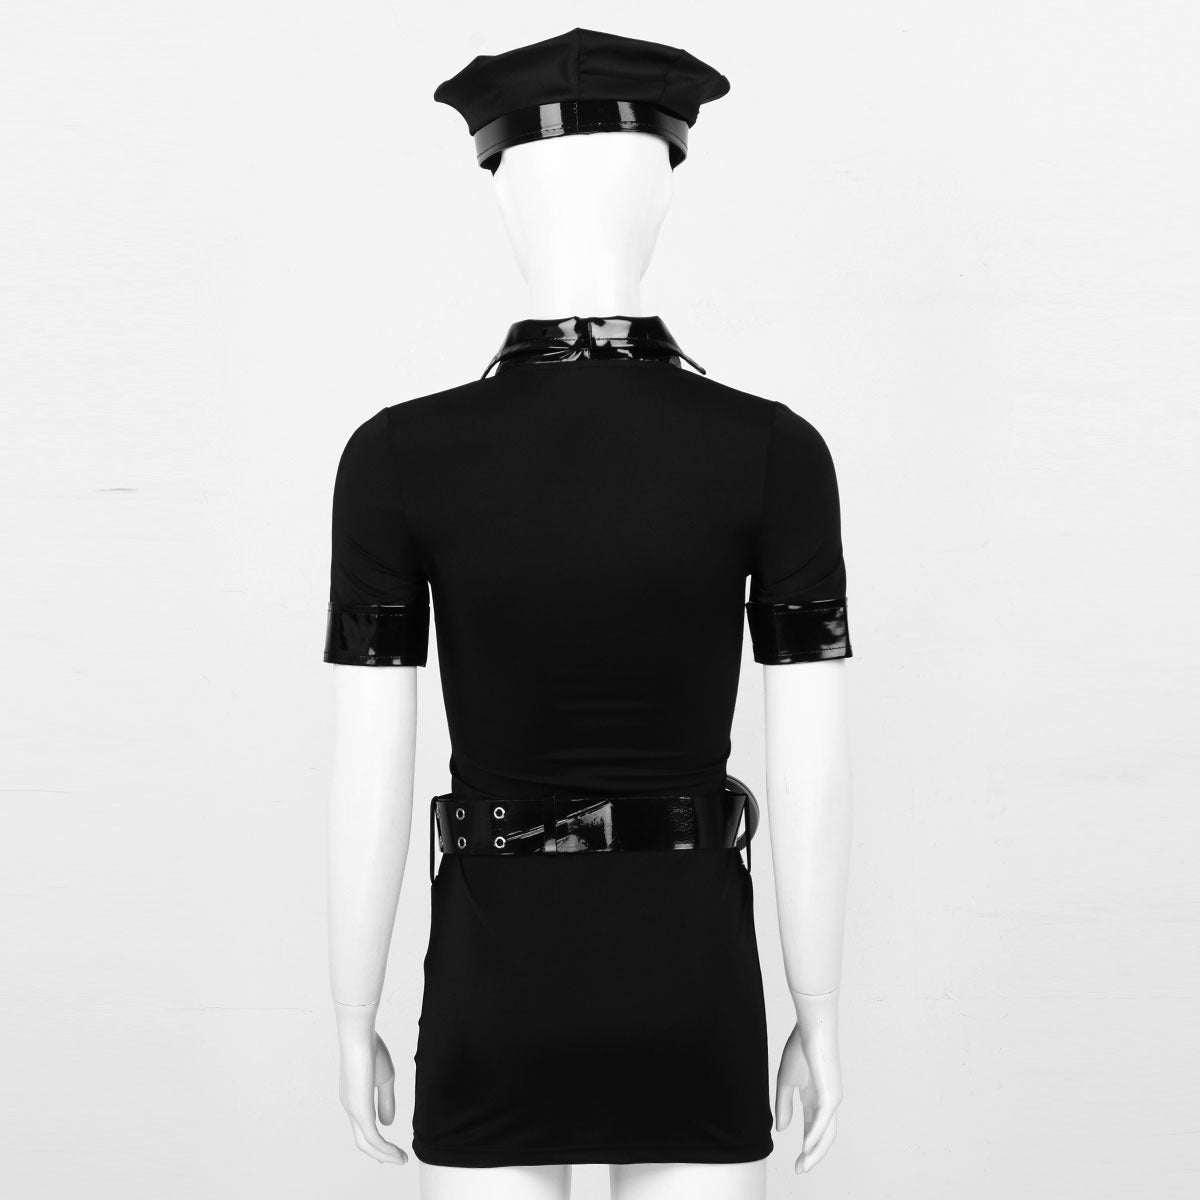 Police Officer Cosplay Women's Costume / Halloween Costume With Hat And Cuffs / Bodycon Mini Dress - HARD'N'HEAVY